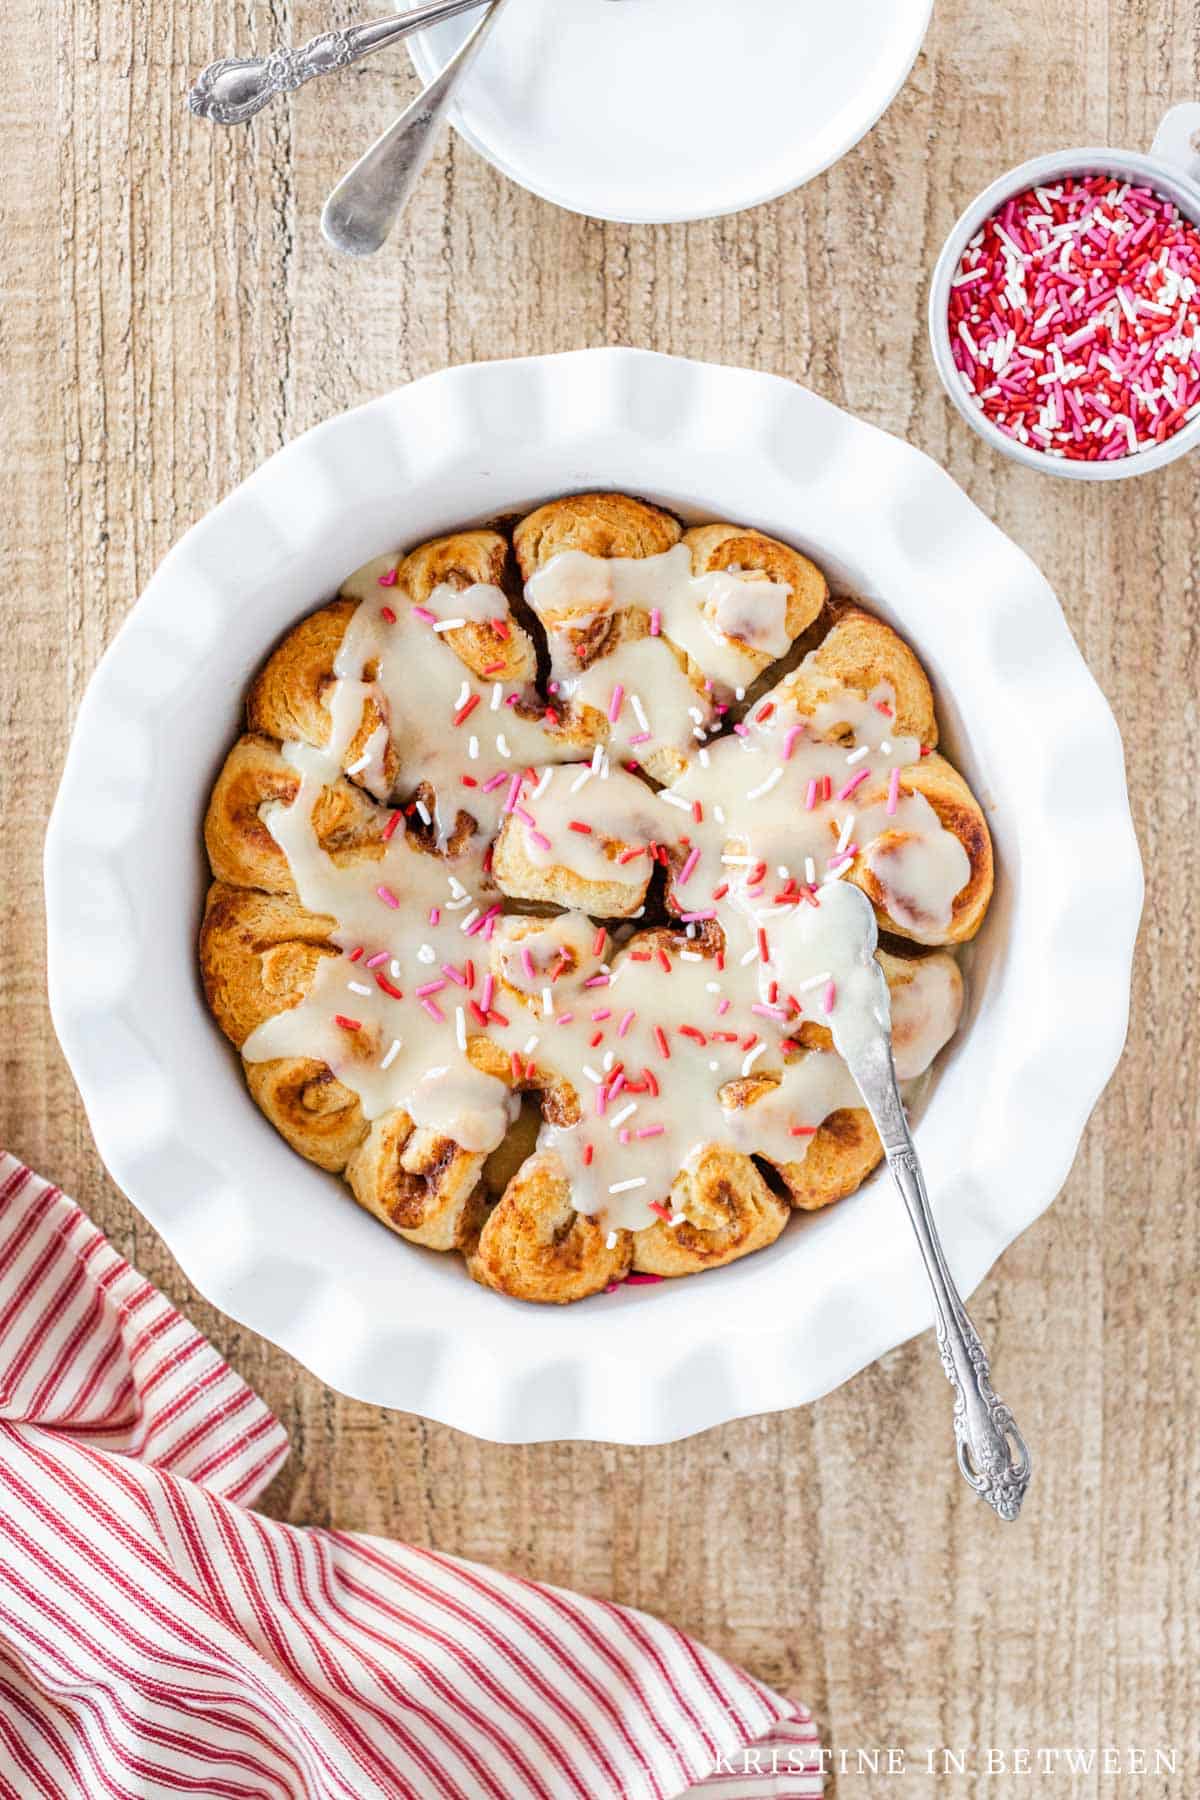 Cinnamon rolls in a round dish with frosting and sprinkles.